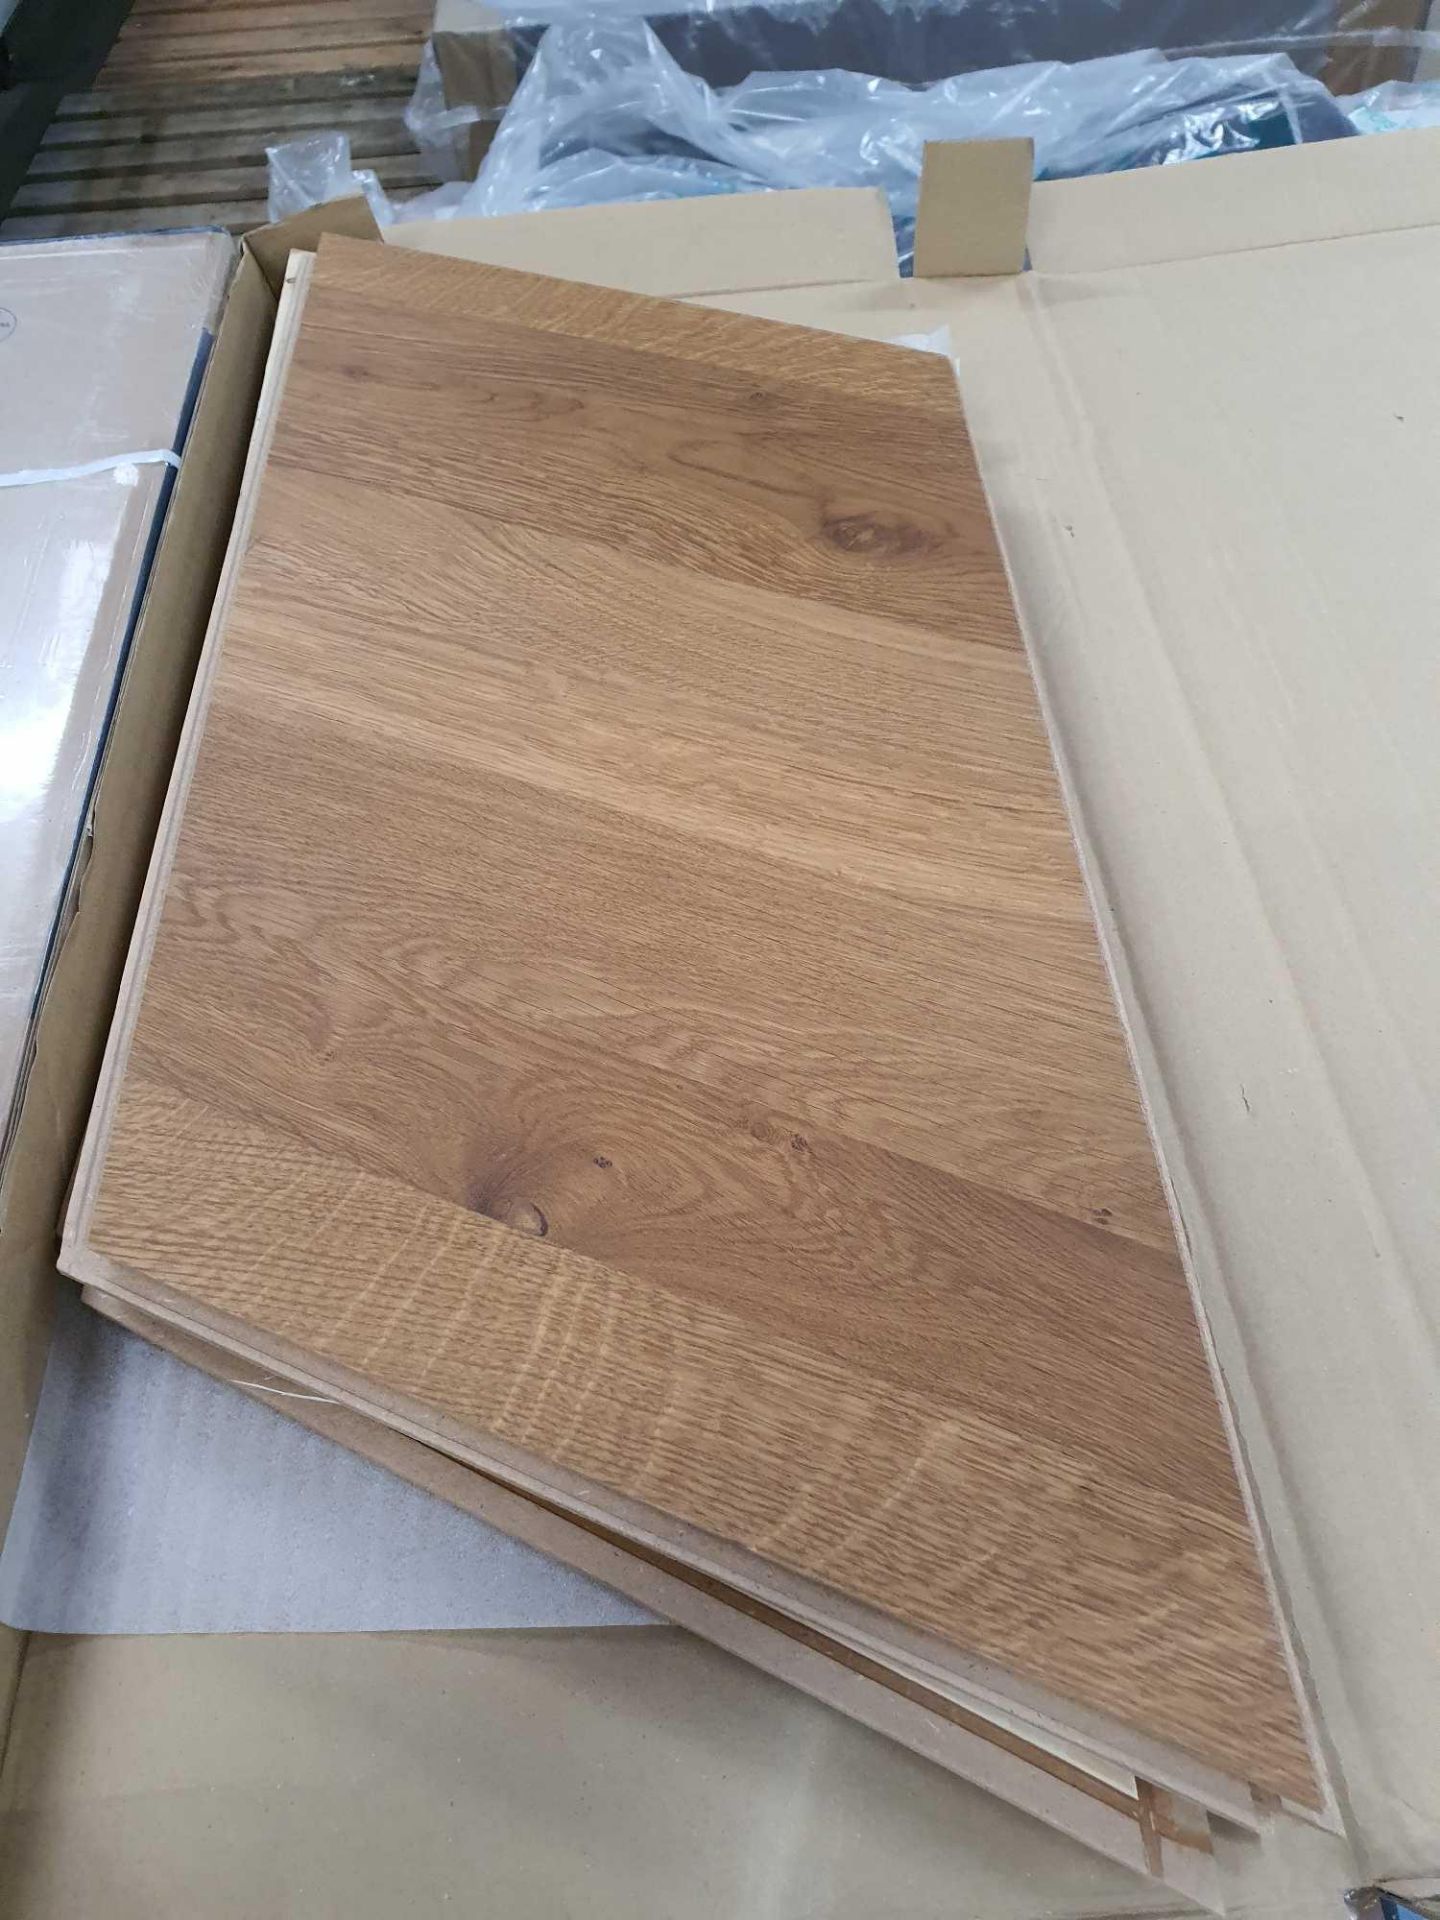 6 packs of Quick Step Intenso wood flooring 1 pack covers 0.744m2 - Image 2 of 5